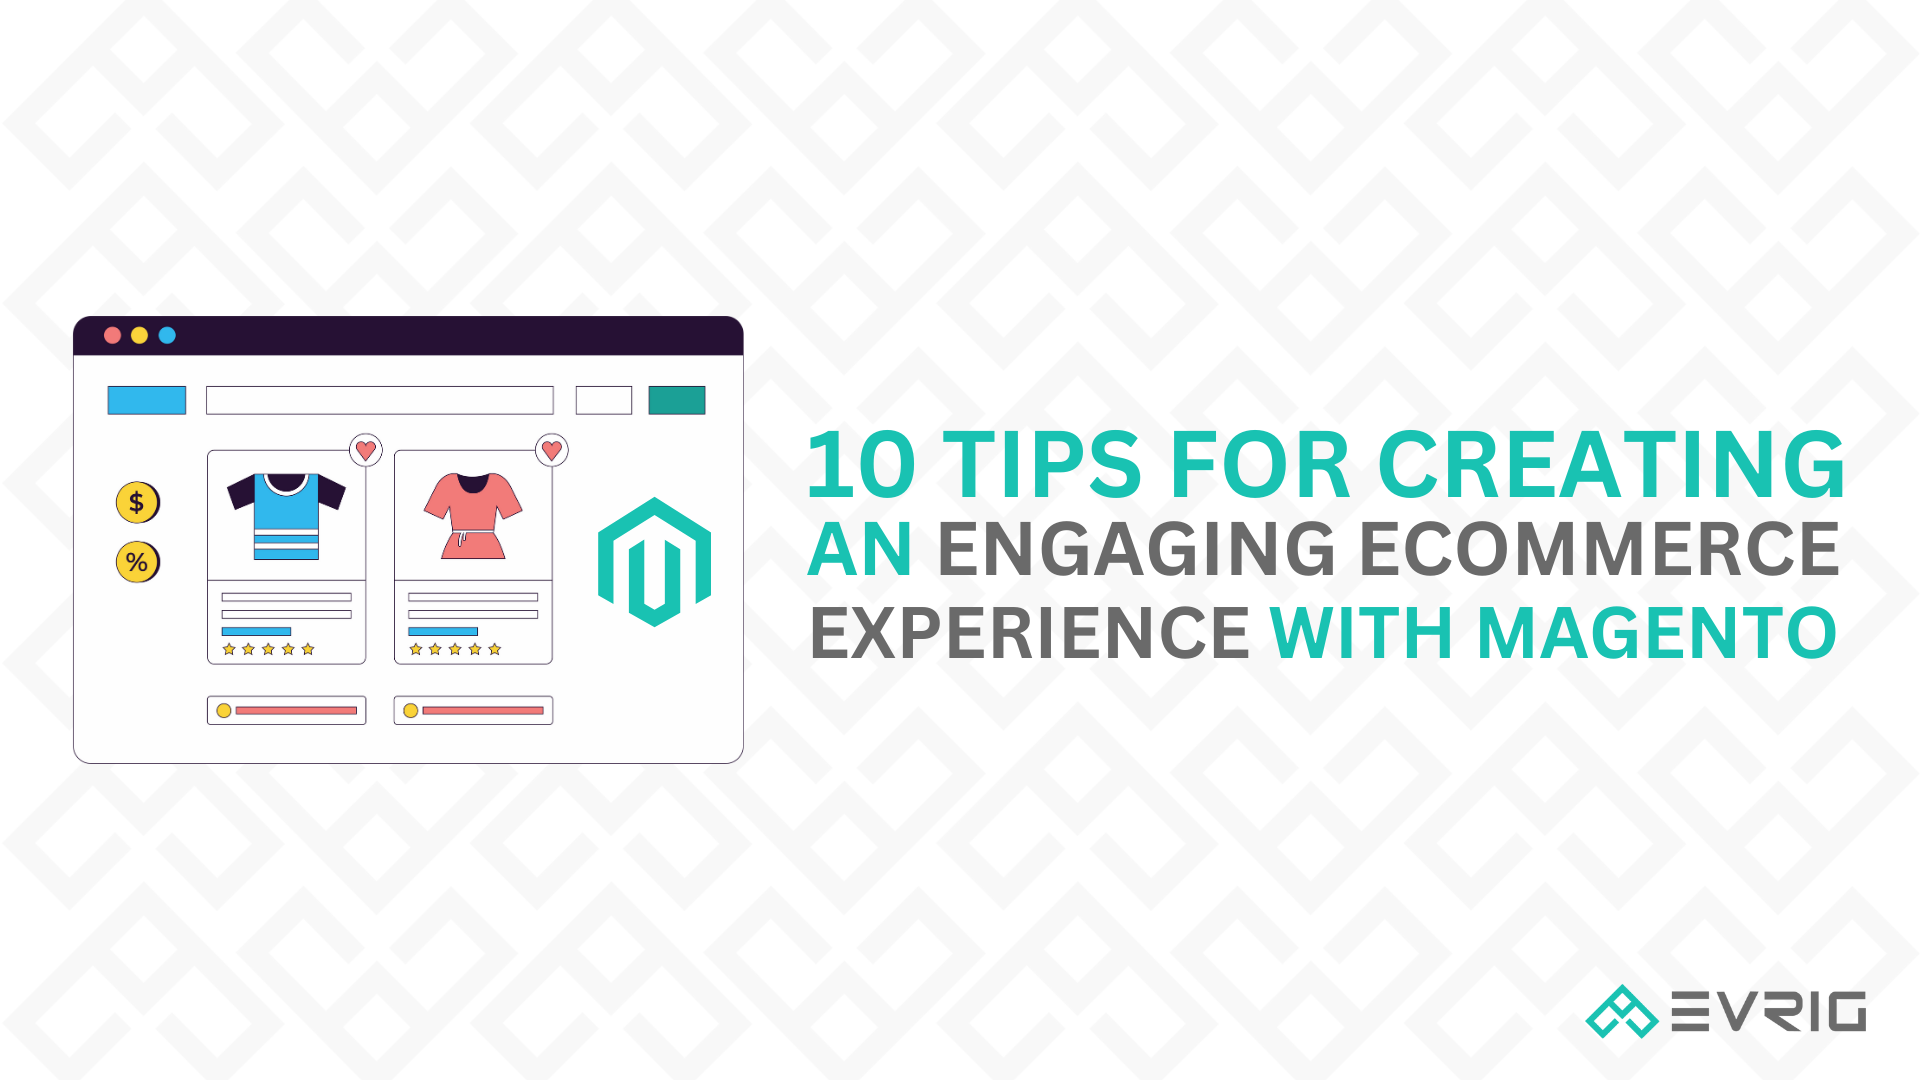 Creating an Engaging Ecommerce Experience with Magento